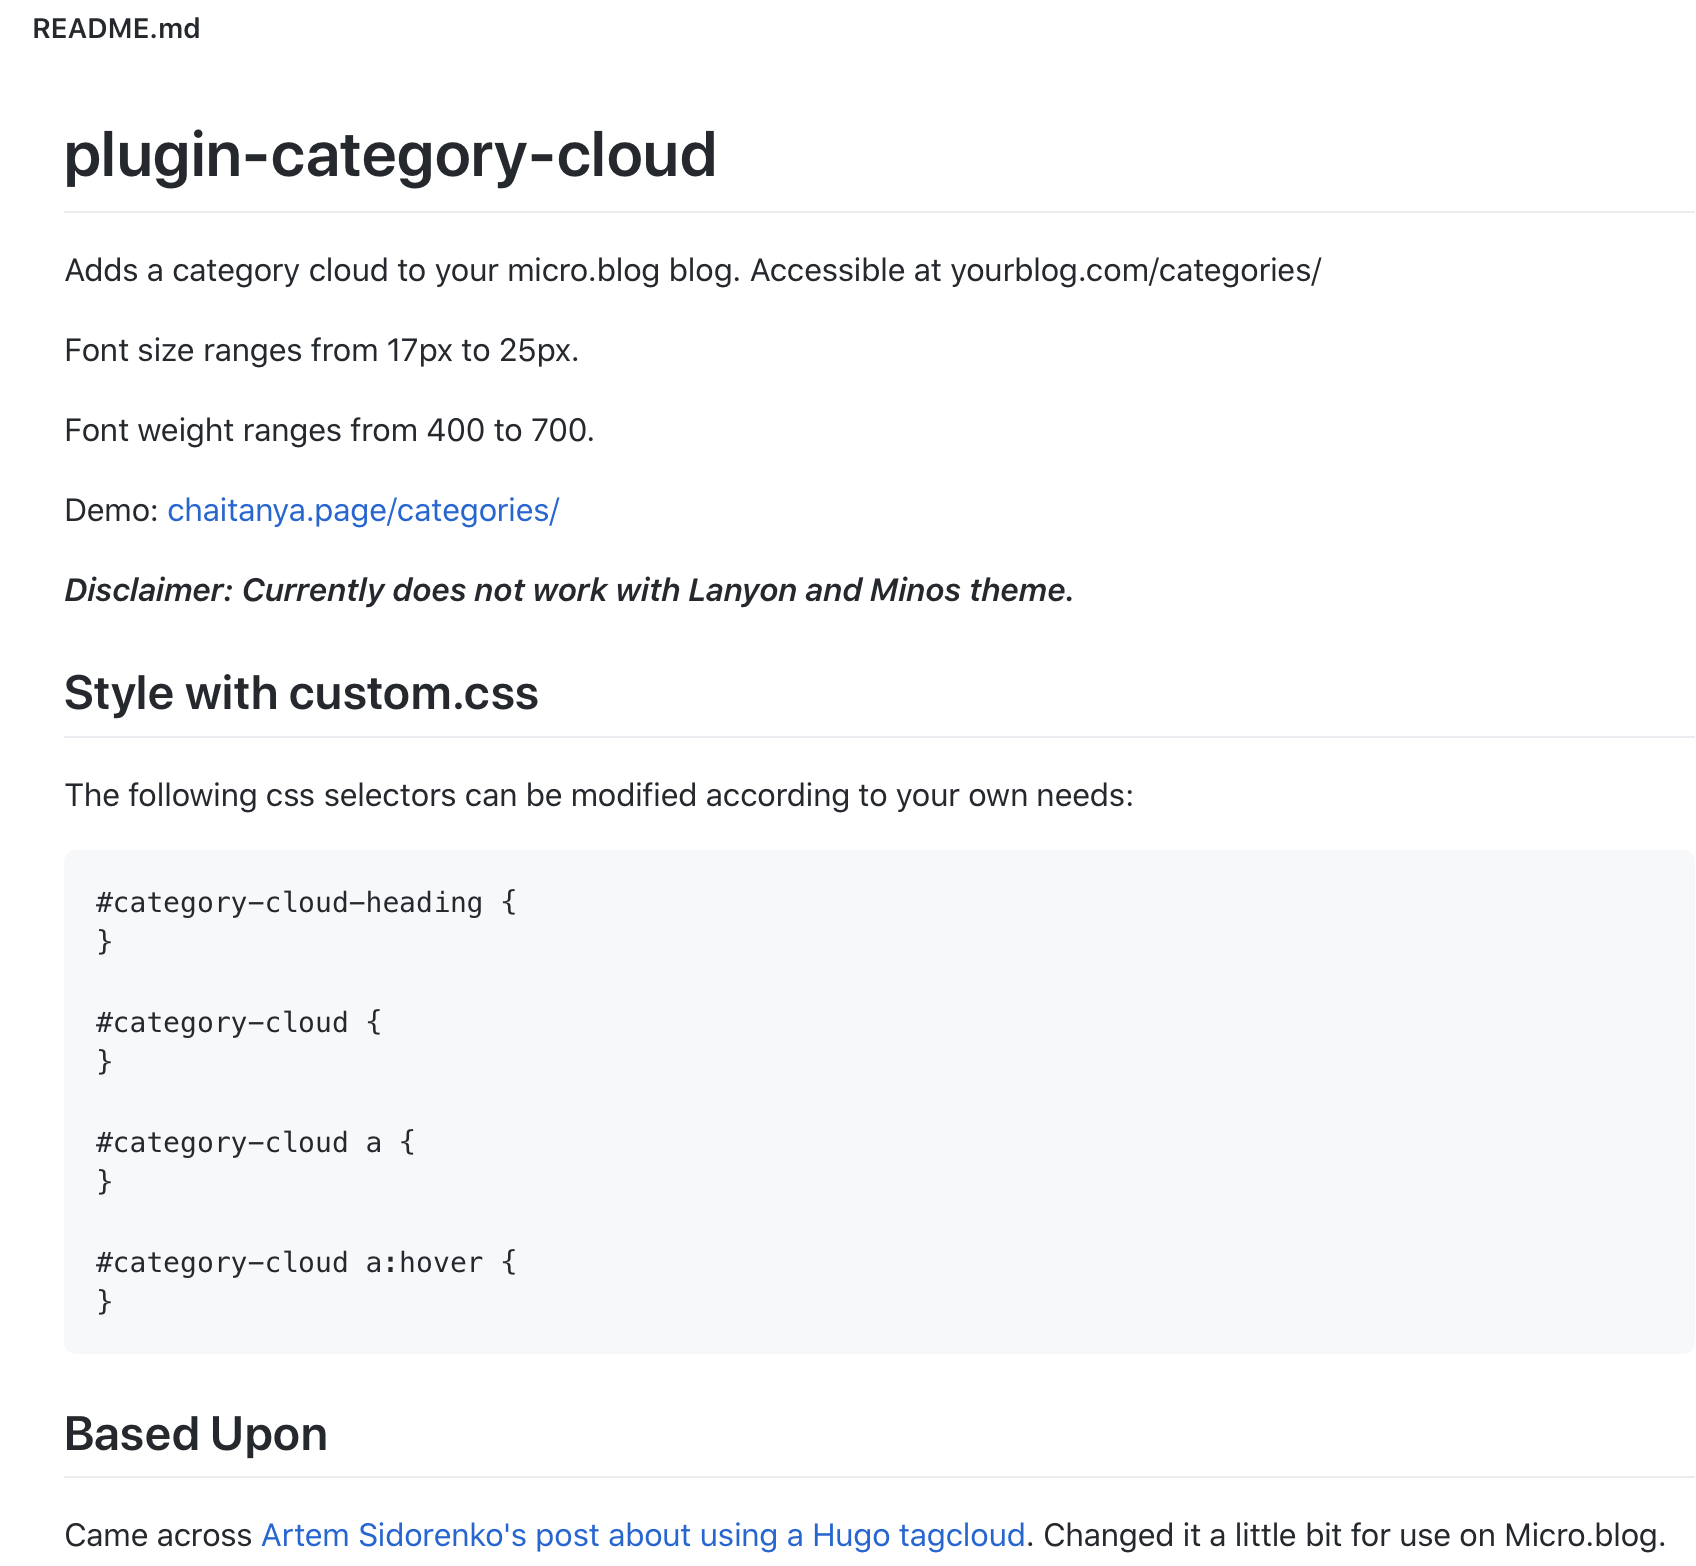 More info on the Category cloud plug-in. 